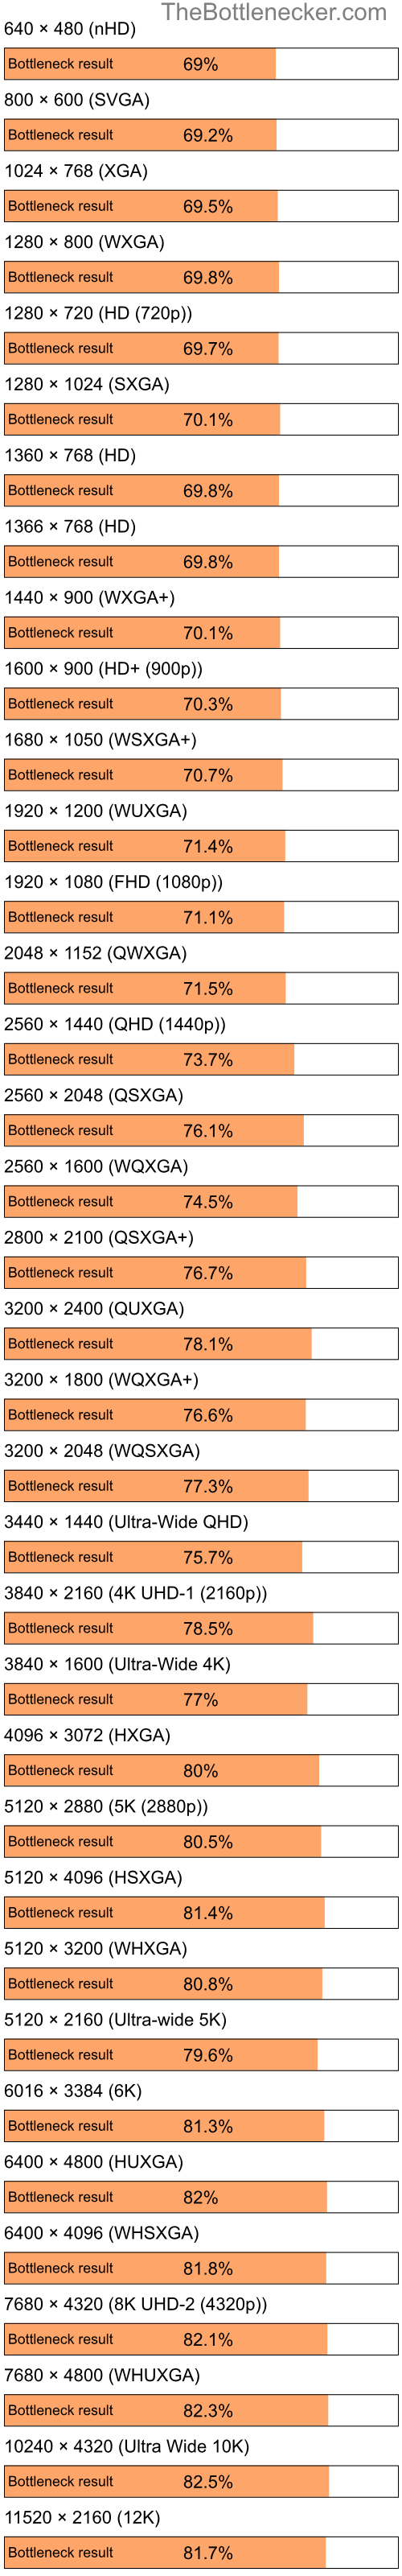 Bottleneck results by resolution for Intel Pentium 4 and AMD Radeon 9500 PRO in Processor Intense Tasks